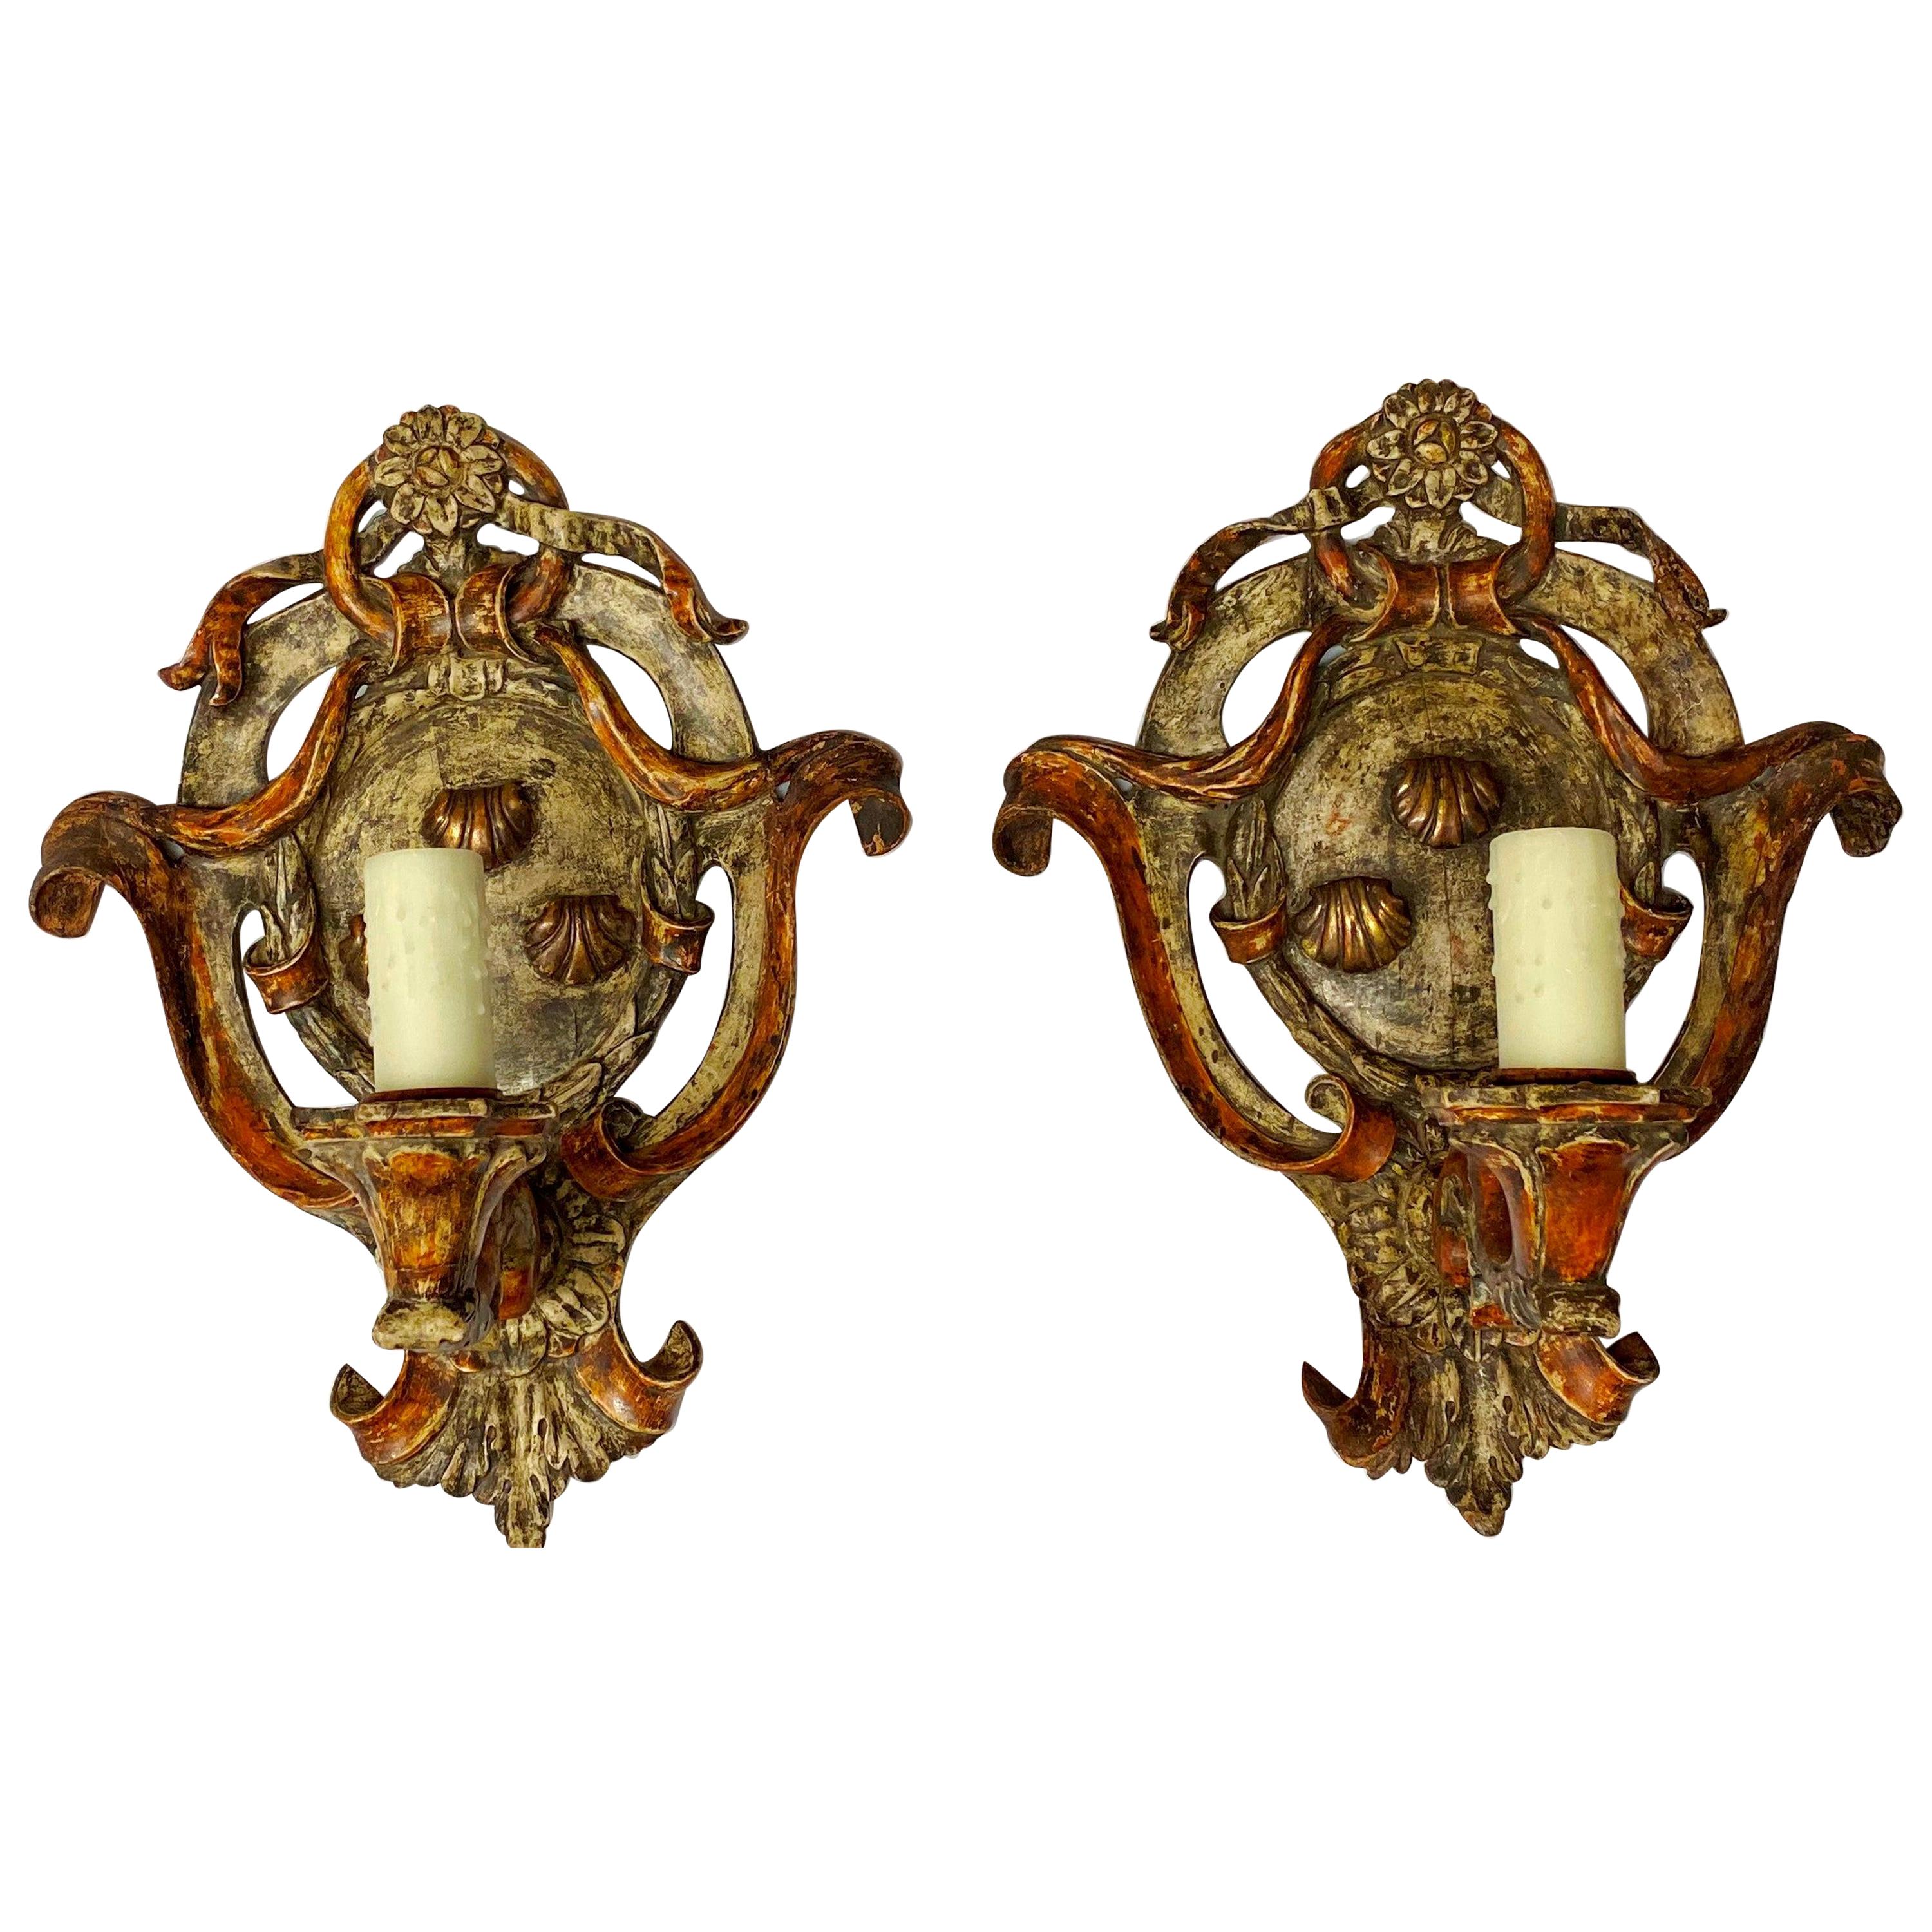 Pair of Italian Painted Carved Wood Sconces, 19th Century For Sale